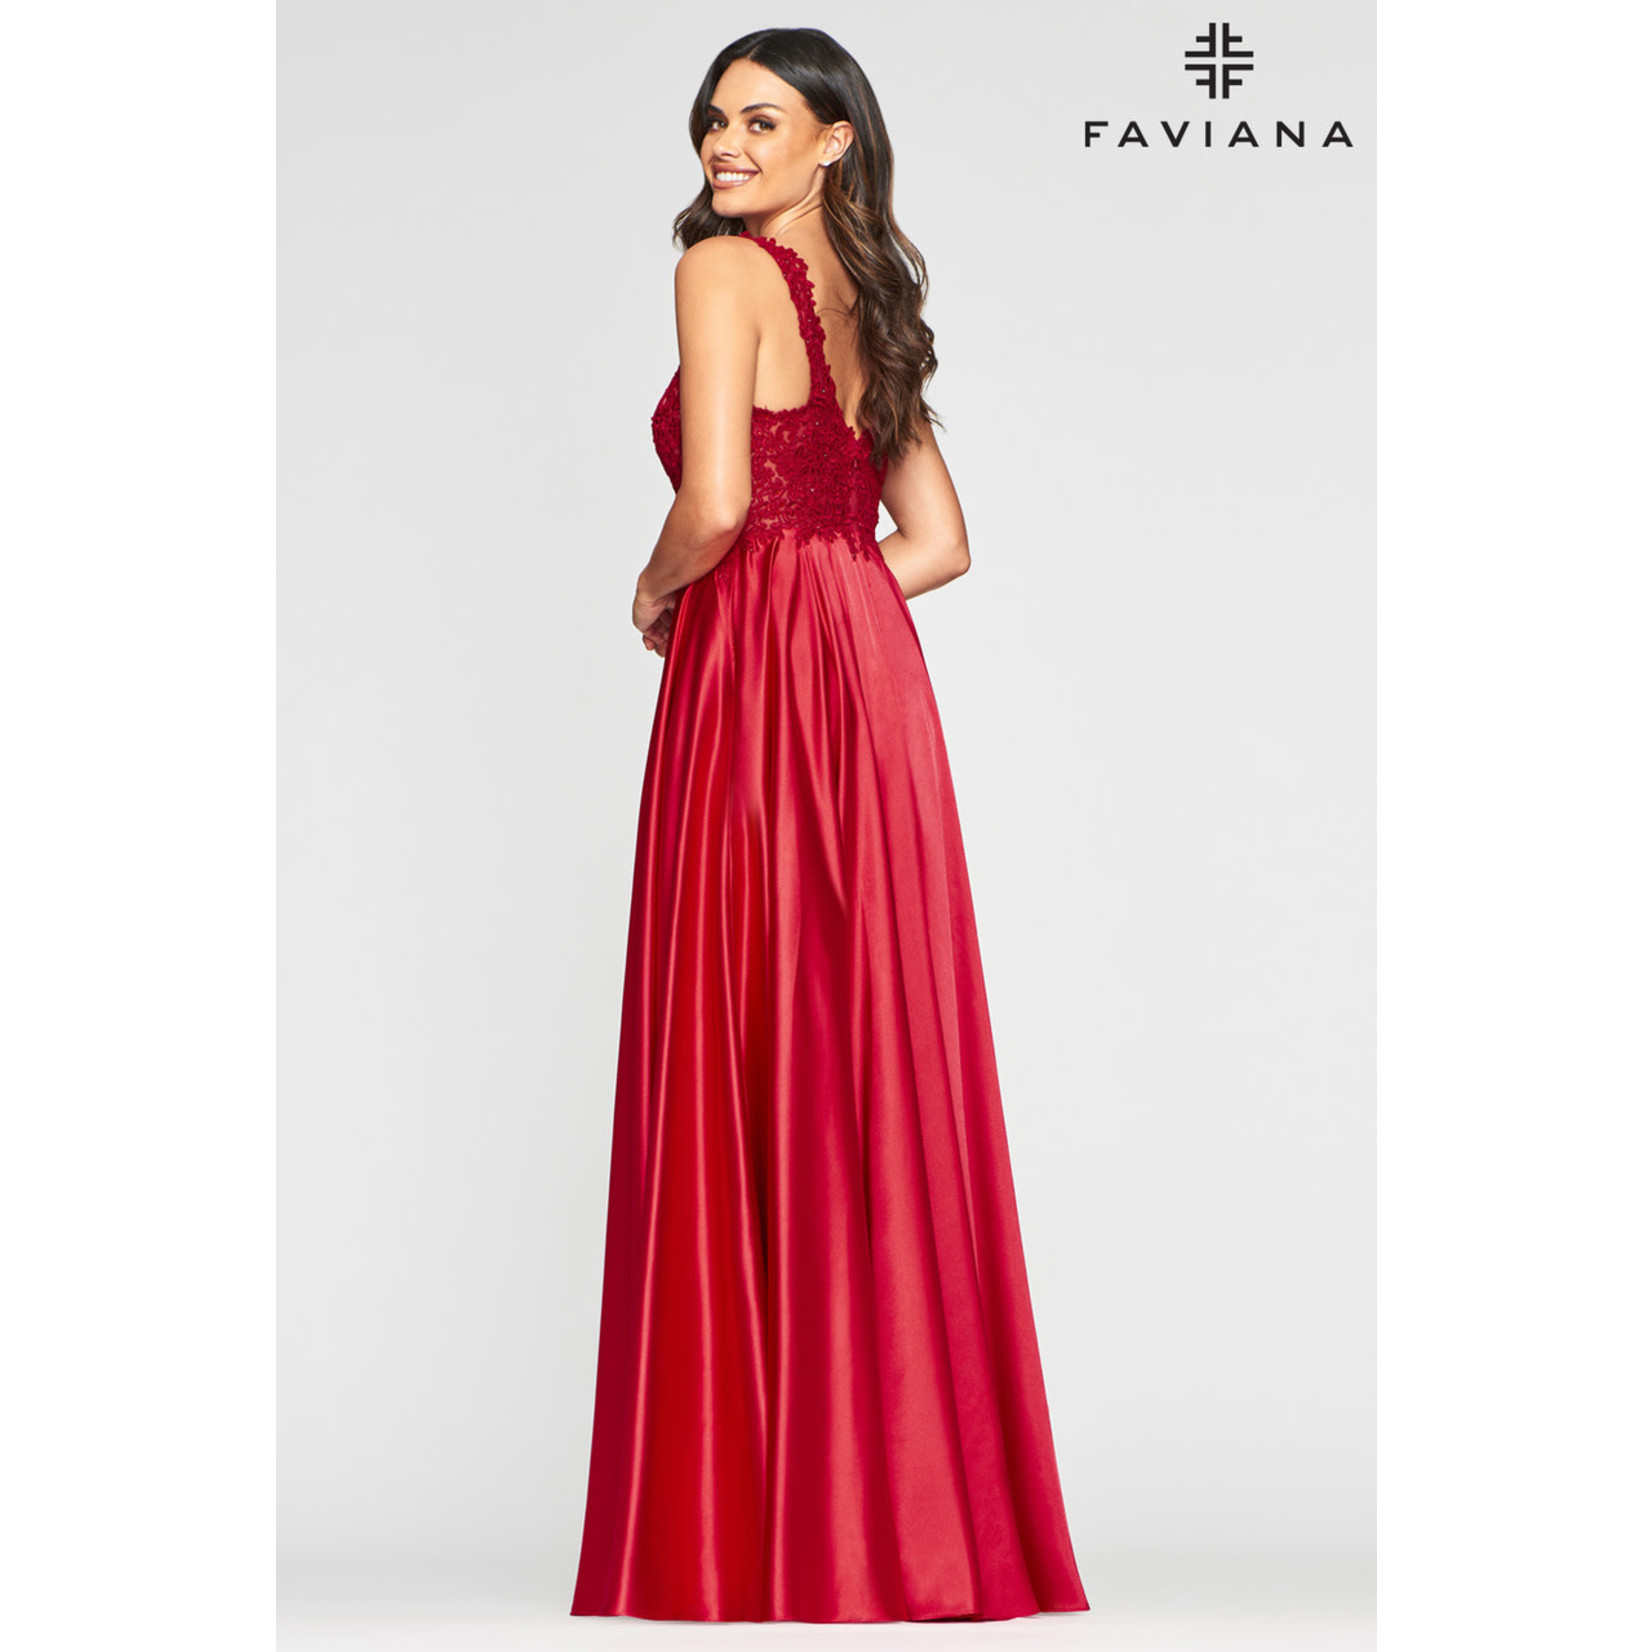 Faviana 10407 Lace A-Line Gown